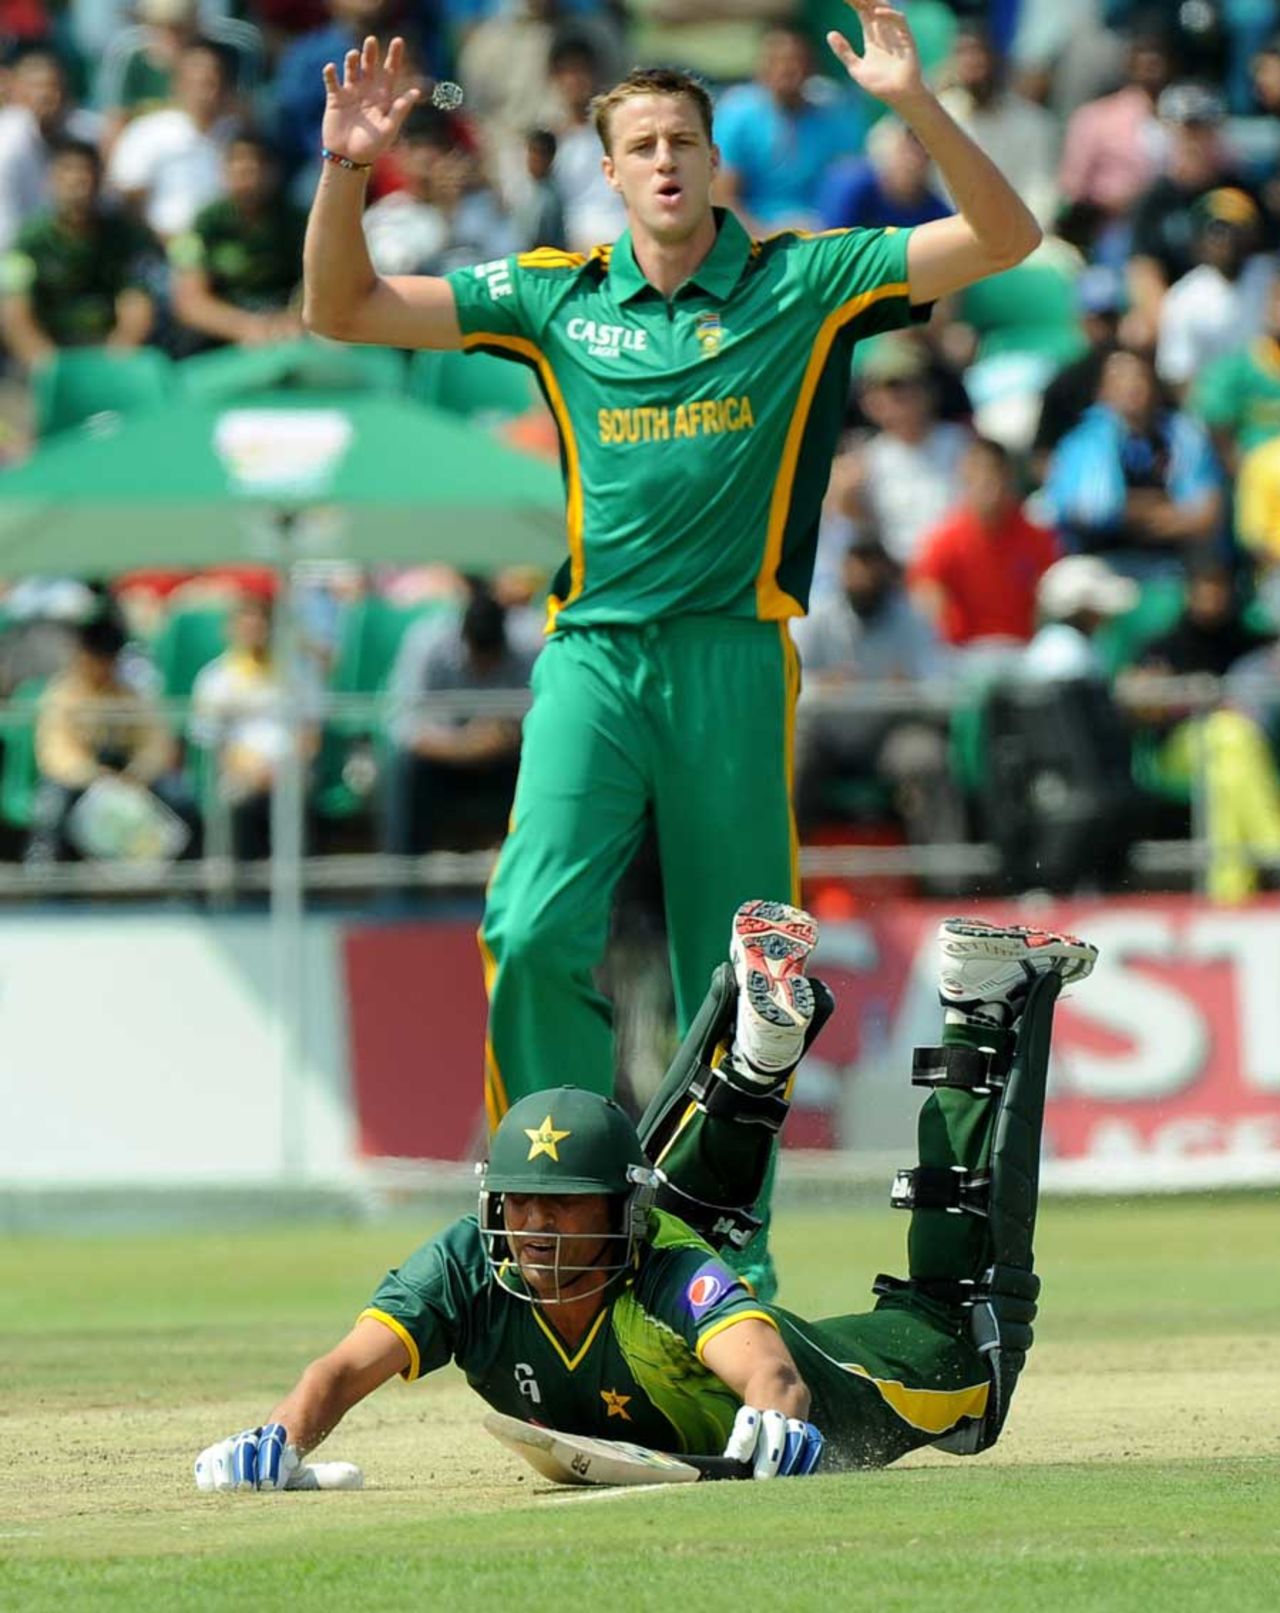 Younis Khan dives to make it back to the crease as Morne Morkel looks on, South Africa v Pakistan, 5th ODI, Benoni, March 24, 2013